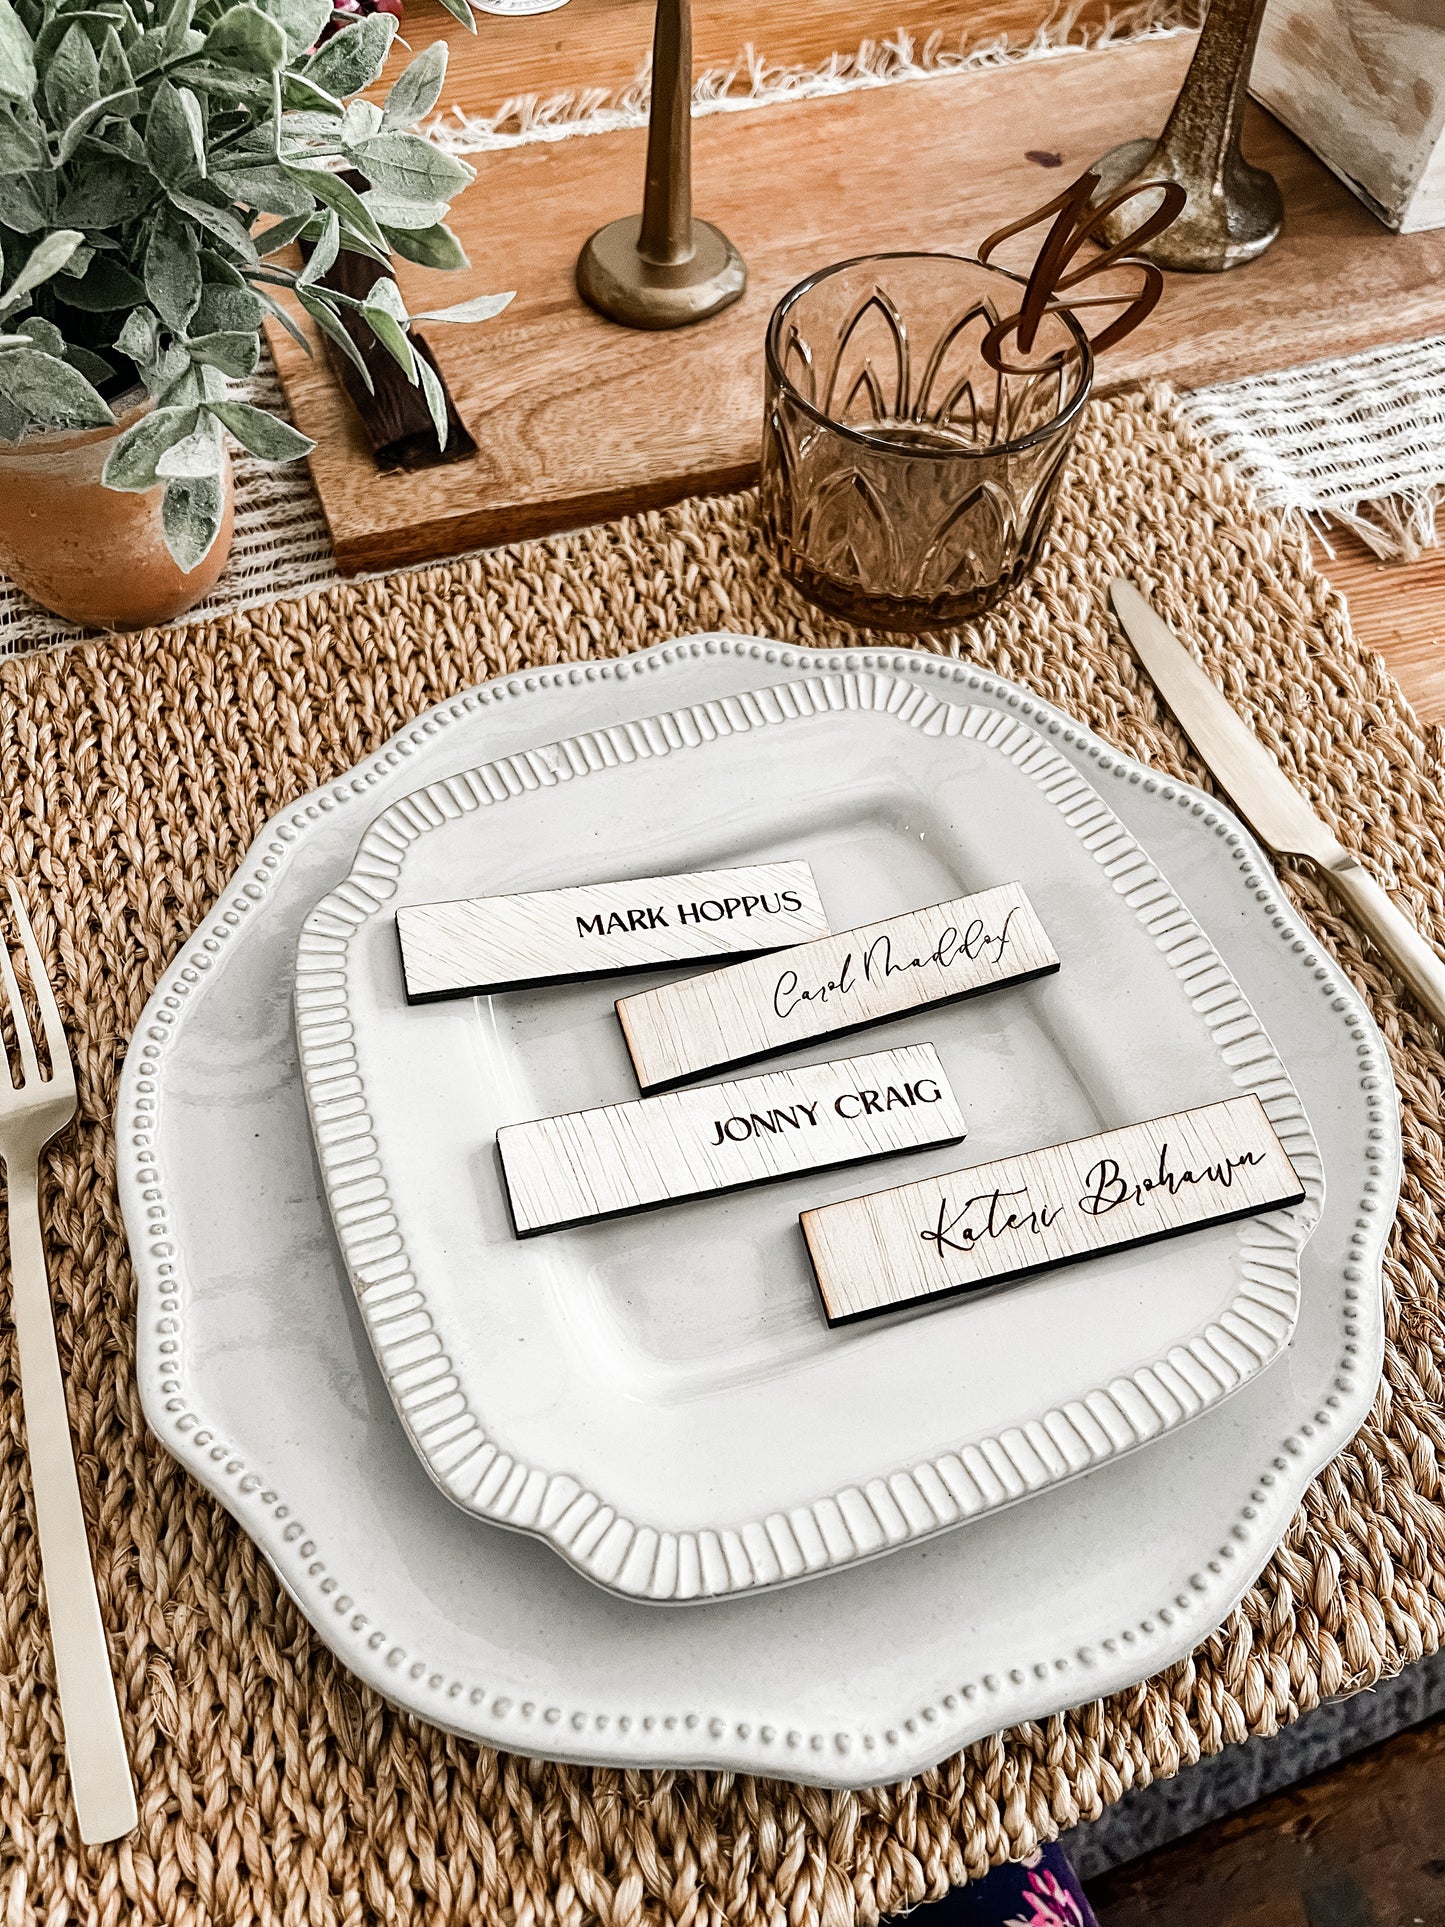 Wooden engraved place cards